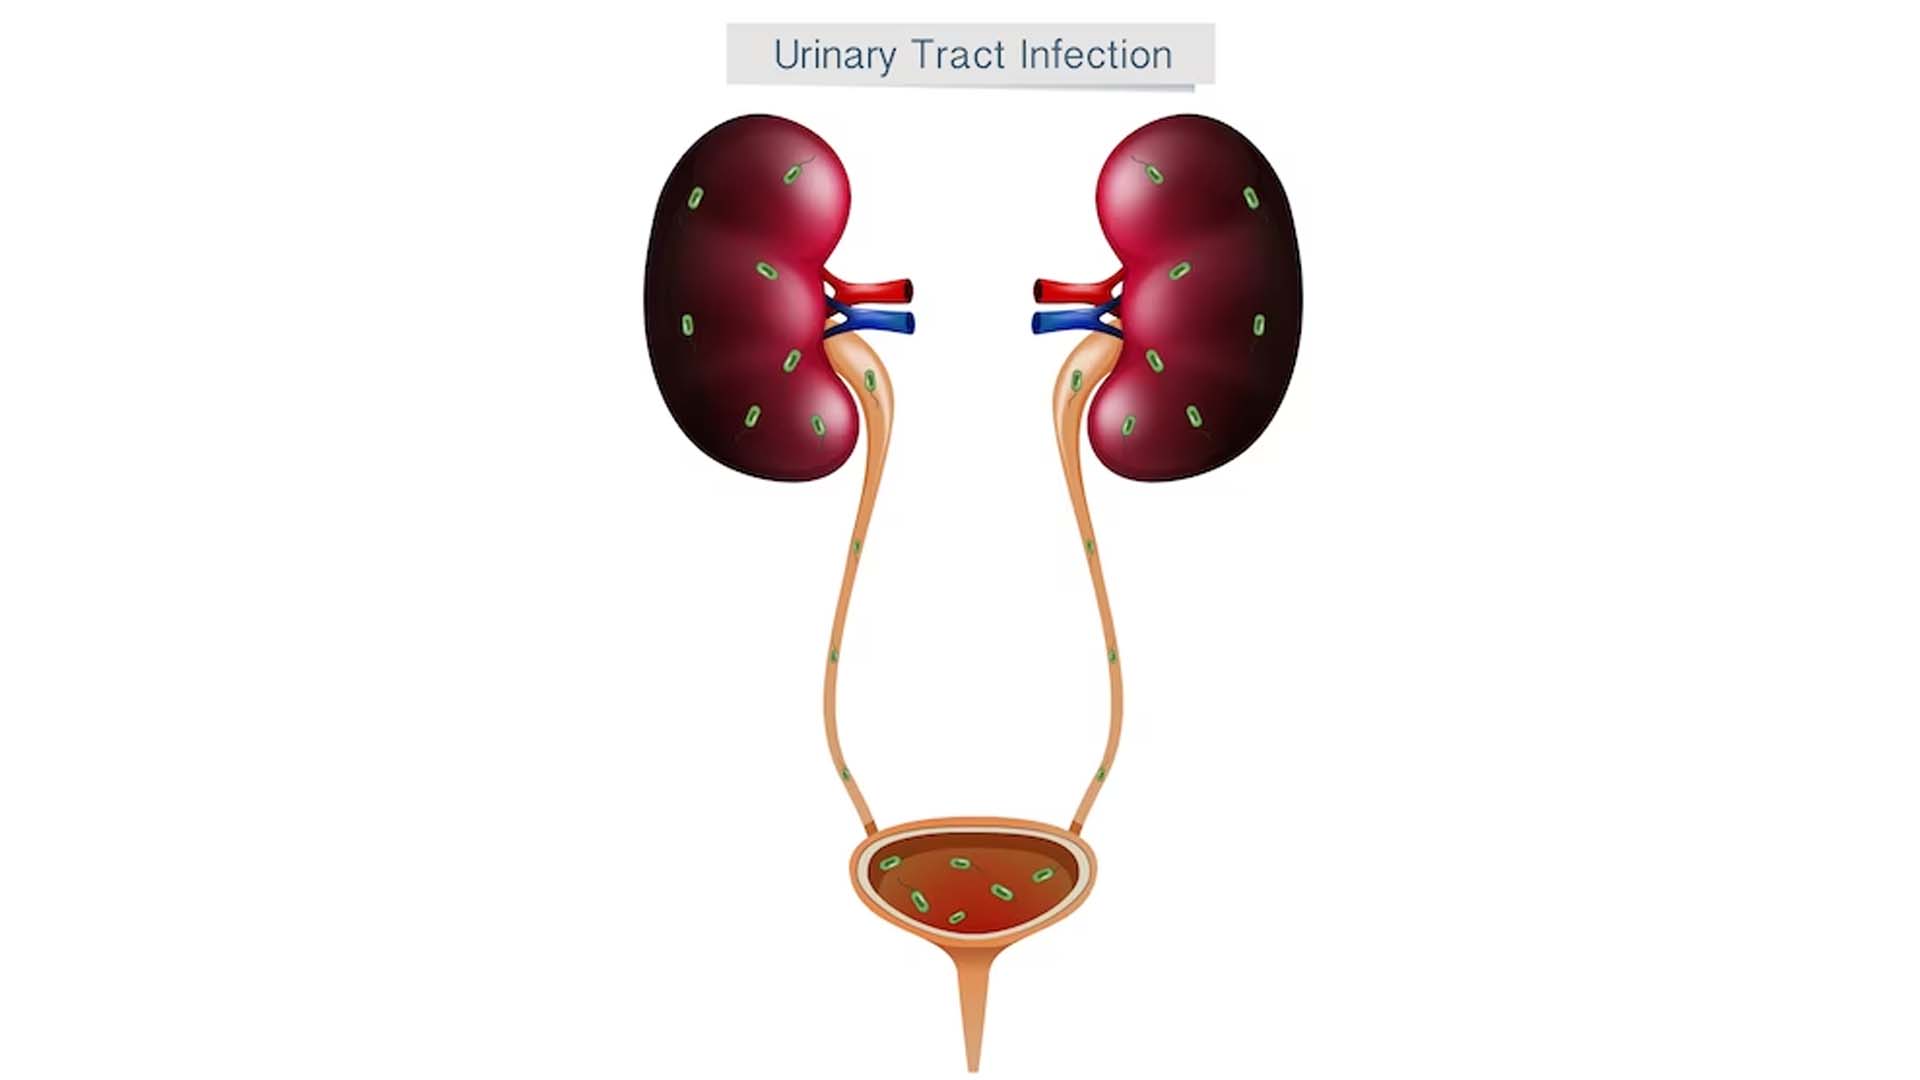 urinary tract infection (UTI)